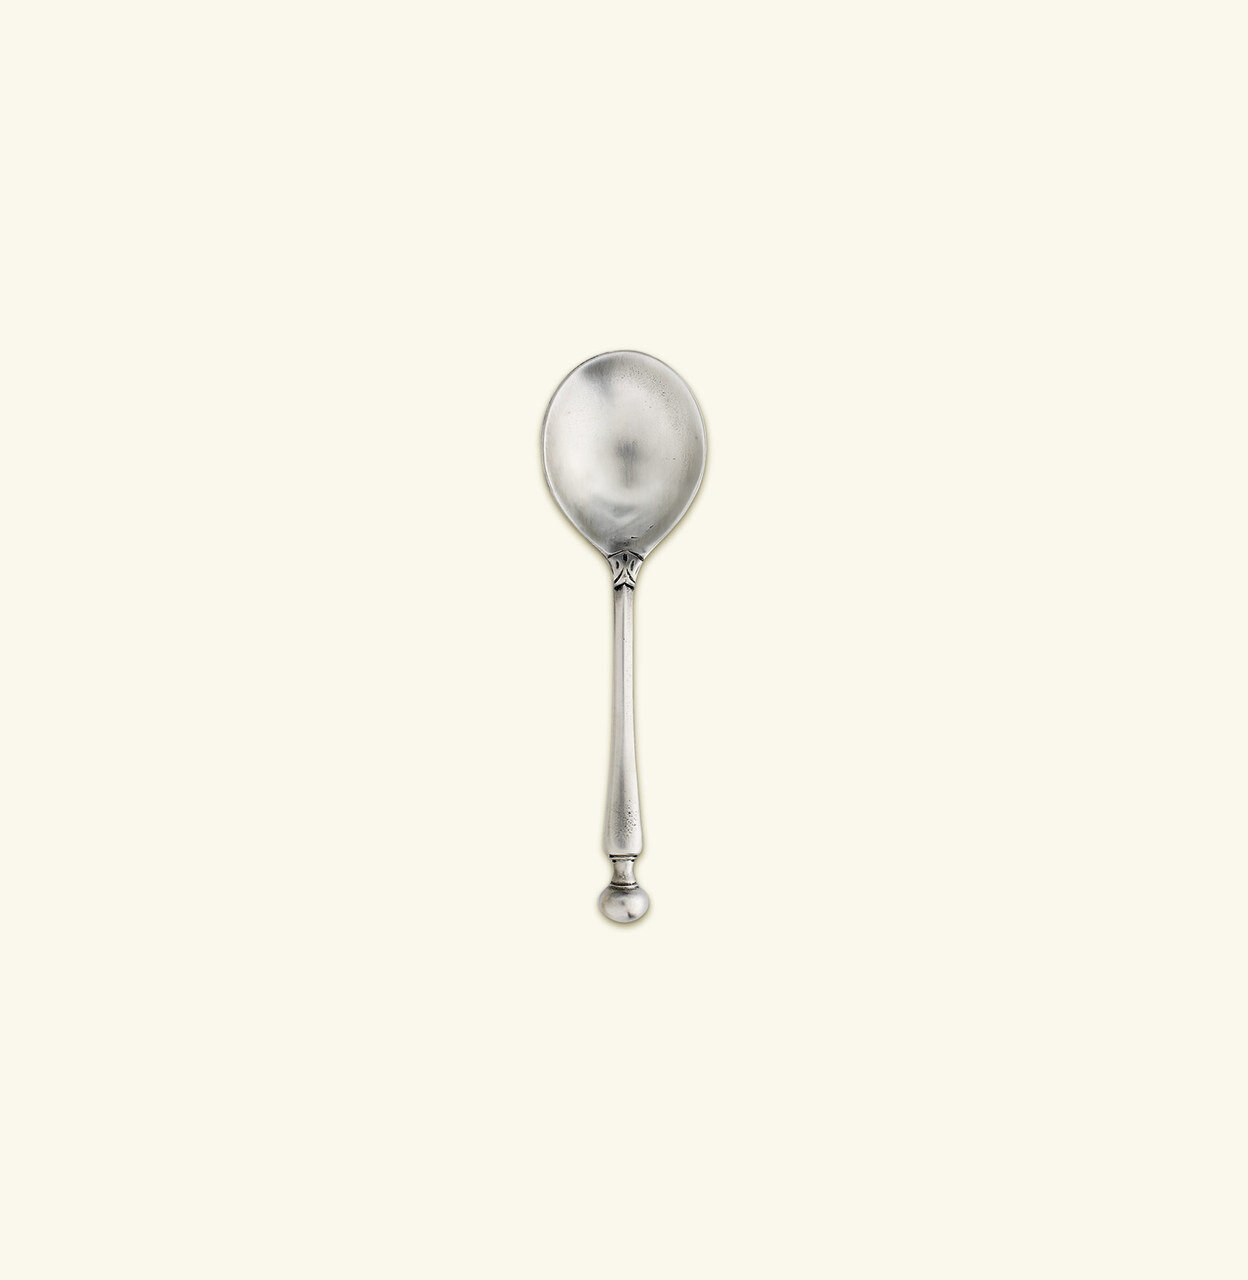 Match Pewter Large Taper Spoon a846.0